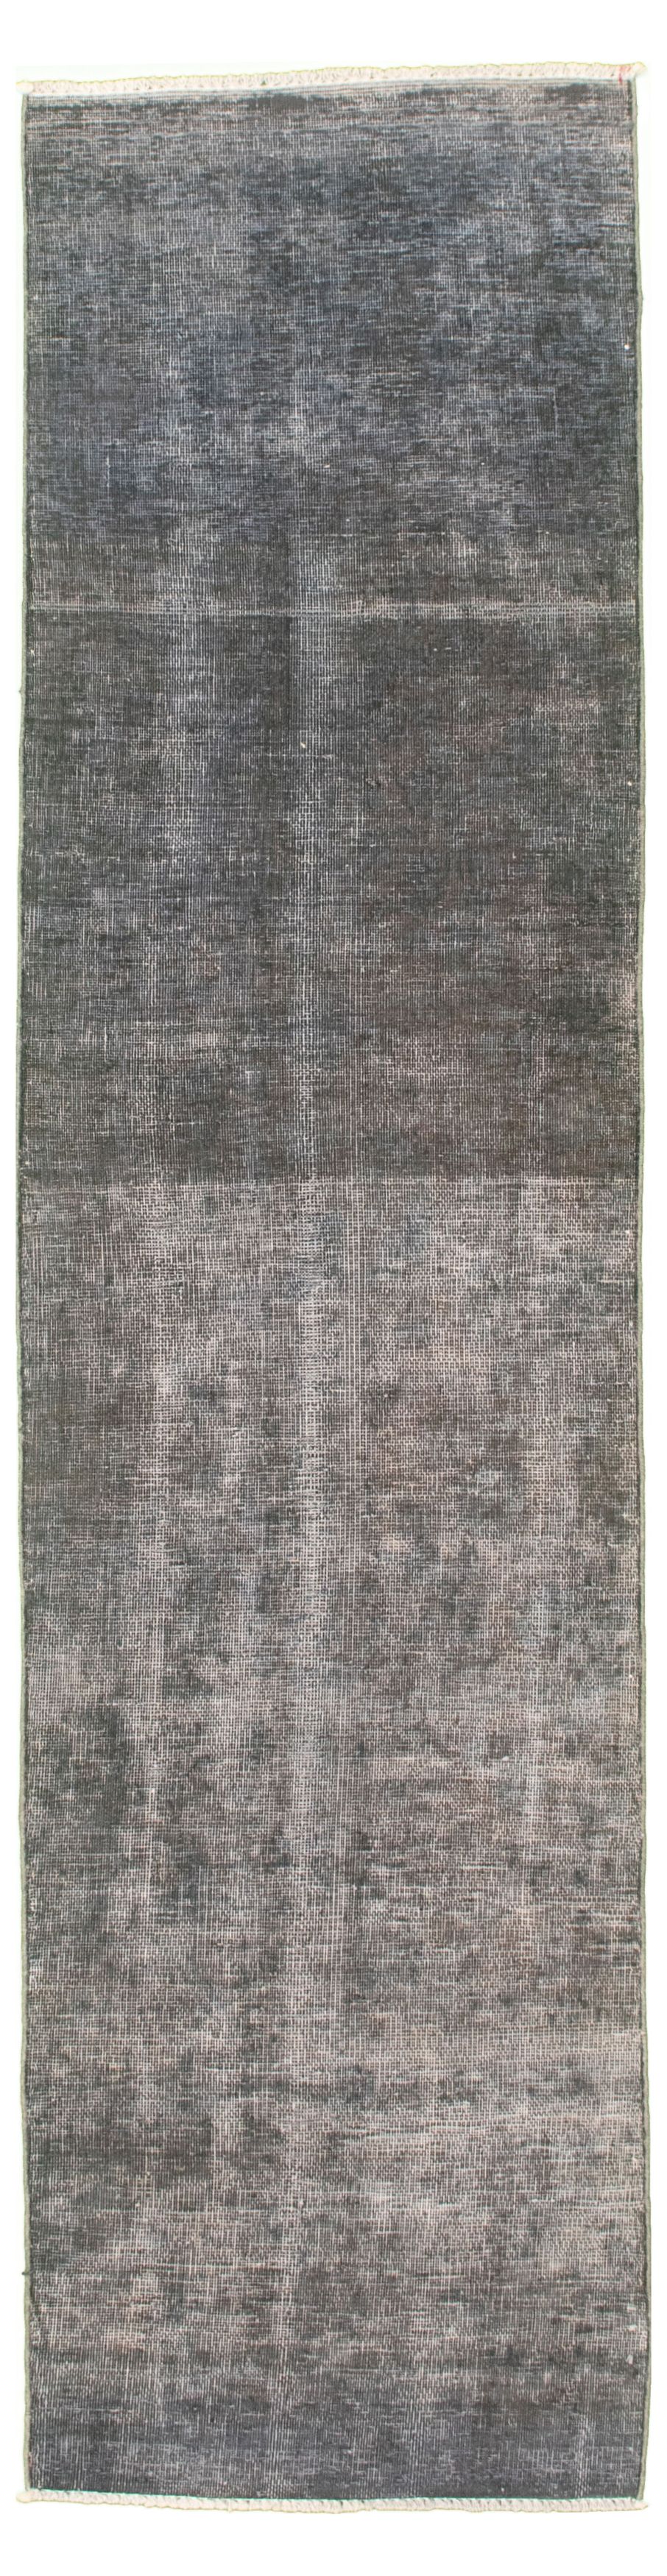 Hand-knotted Color Transition Dark Navy Wool Rug 2'1" x 8'8" Size: 2'1" x 8'8"  